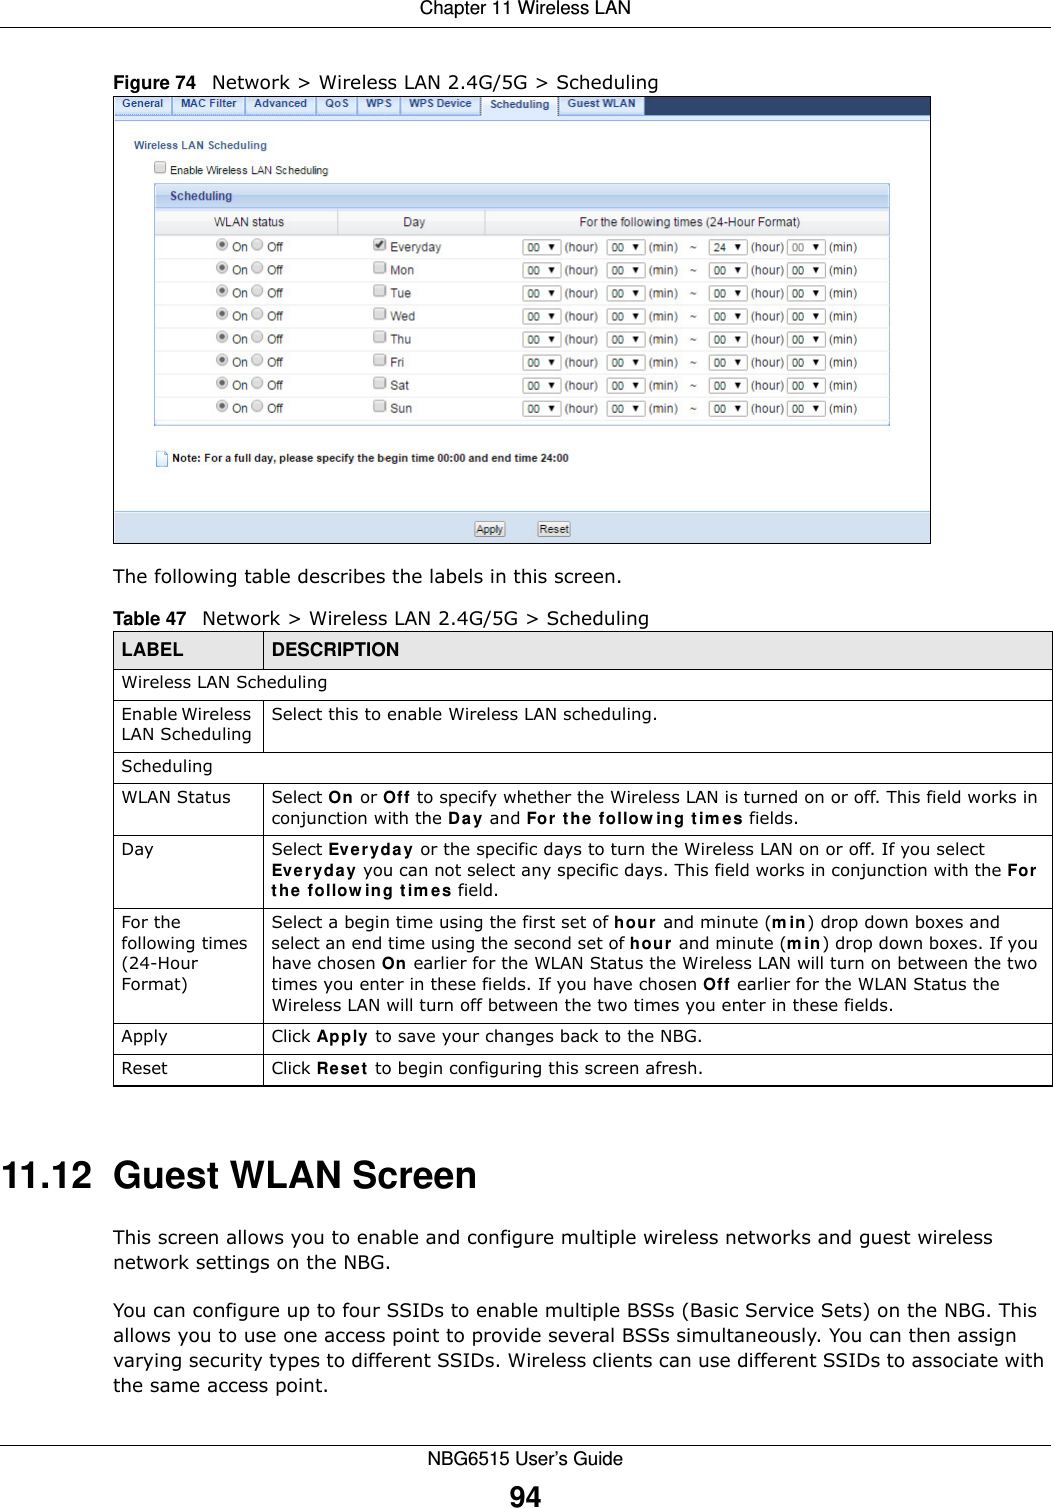 Chapter 11 Wireless LANNBG6515 User’s Guide94Figure 74   Network &gt; Wireless LAN 2.4G/5G &gt; SchedulingThe following table describes the labels in this screen.11.12  Guest WLAN ScreenThis screen allows you to enable and configure multiple wireless networks and guest wireless network settings on the NBG.You can configure up to four SSIDs to enable multiple BSSs (Basic Service Sets) on the NBG. This allows you to use one access point to provide several BSSs simultaneously. You can then assign varying security types to different SSIDs. Wireless clients can use different SSIDs to associate with the same access point.Table 47   Network &gt; Wireless LAN 2.4G/5G &gt; SchedulingLABEL DESCRIPTIONWireless LAN SchedulingEnable Wireless LAN SchedulingSelect this to enable Wireless LAN scheduling.SchedulingWLAN Status Select On or Off to specify whether the Wireless LAN is turned on or off. This field works in conjunction with the Day and For the following times fields.Day Select Everyday or the specific days to turn the Wireless LAN on or off. If you select Everyday you can not select any specific days. This field works in conjunction with the For the following times field.For the following times (24-Hour Format)Select a begin time using the first set of hour and minute (min) drop down boxes and select an end time using the second set of hour and minute (min) drop down boxes. If you have chosen On earlier for the WLAN Status the Wireless LAN will turn on between the two times you enter in these fields. If you have chosen Off earlier for the WLAN Status the Wireless LAN will turn off between the two times you enter in these fields. Apply Click Apply to save your changes back to the NBG.Reset Click Reset to begin configuring this screen afresh.